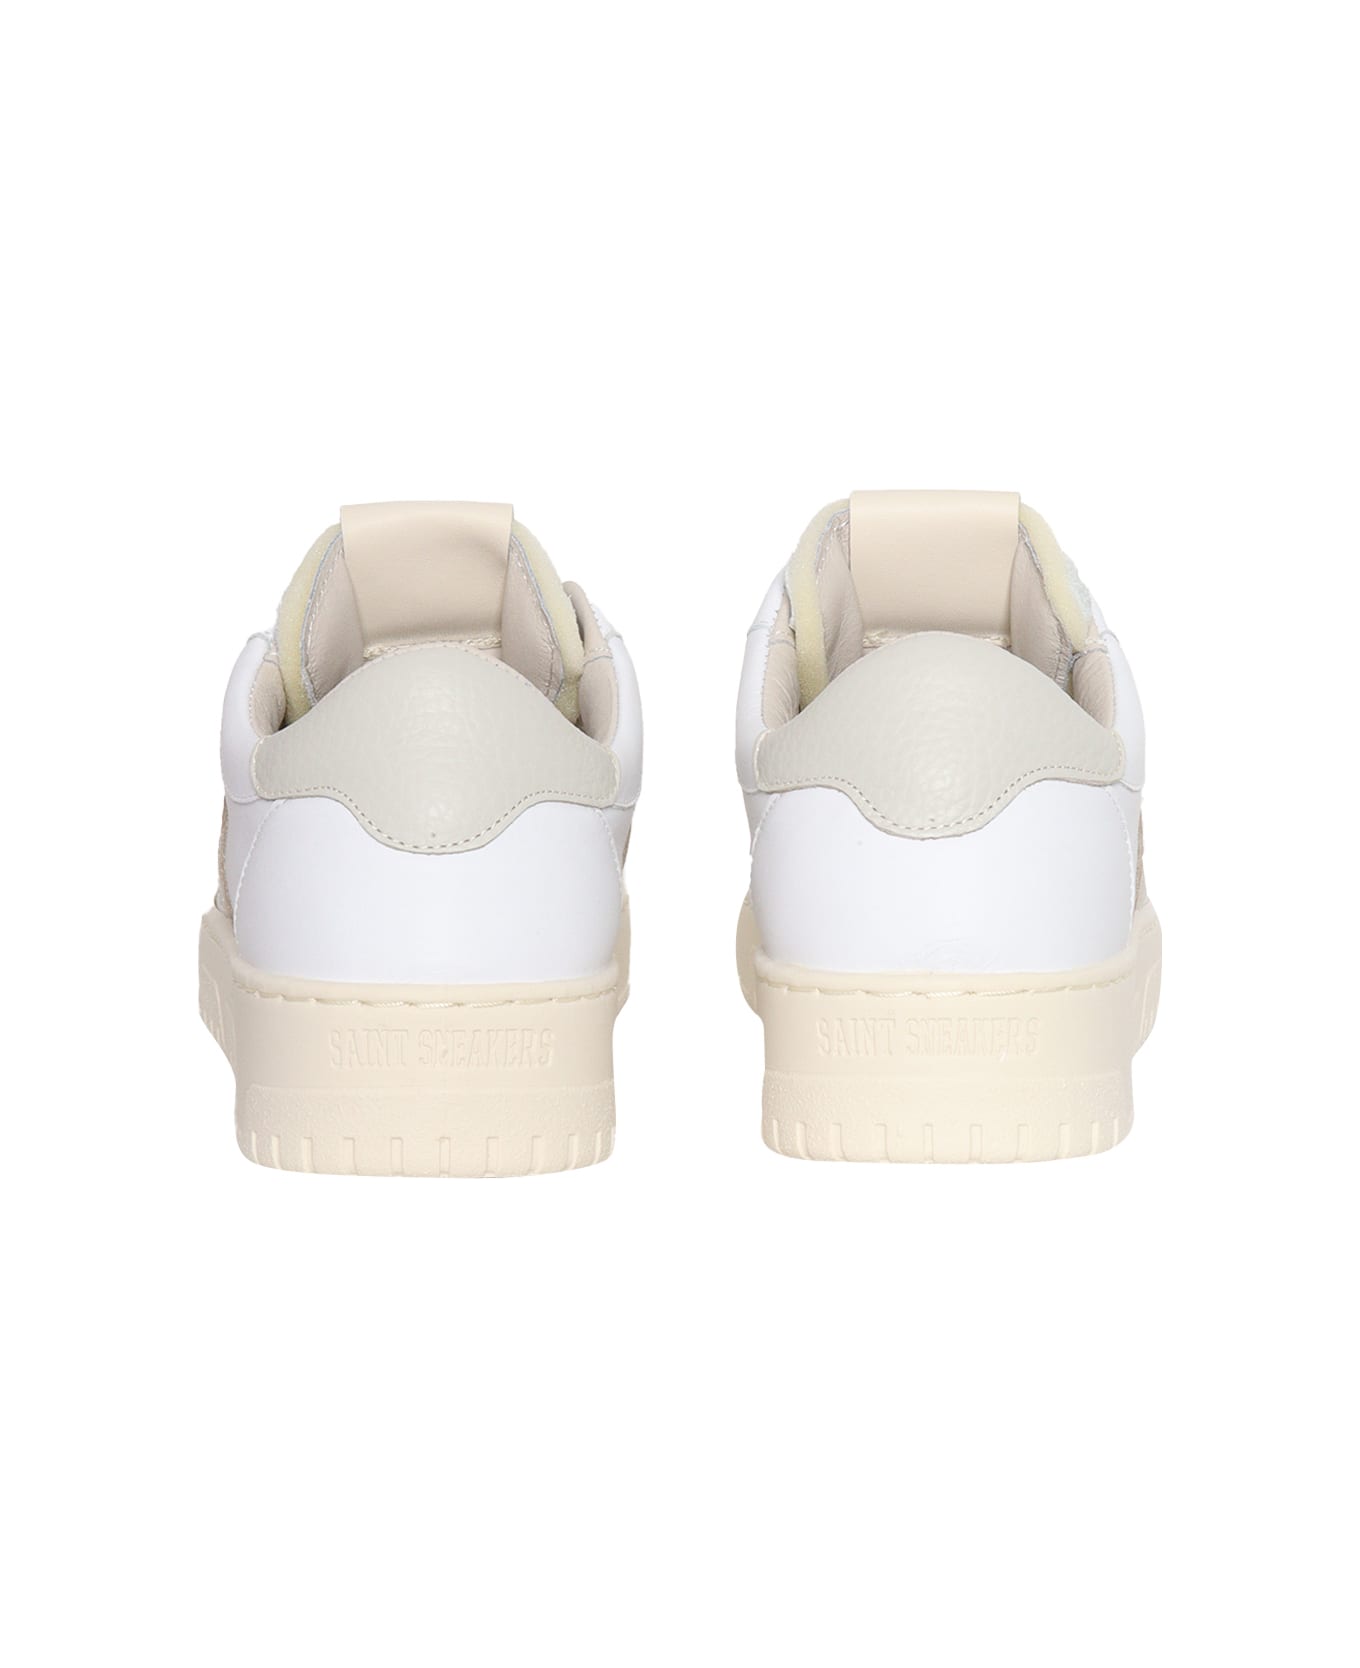 Saint Sneakers White Leather Tennis Sneakers - WHITE スニーカー